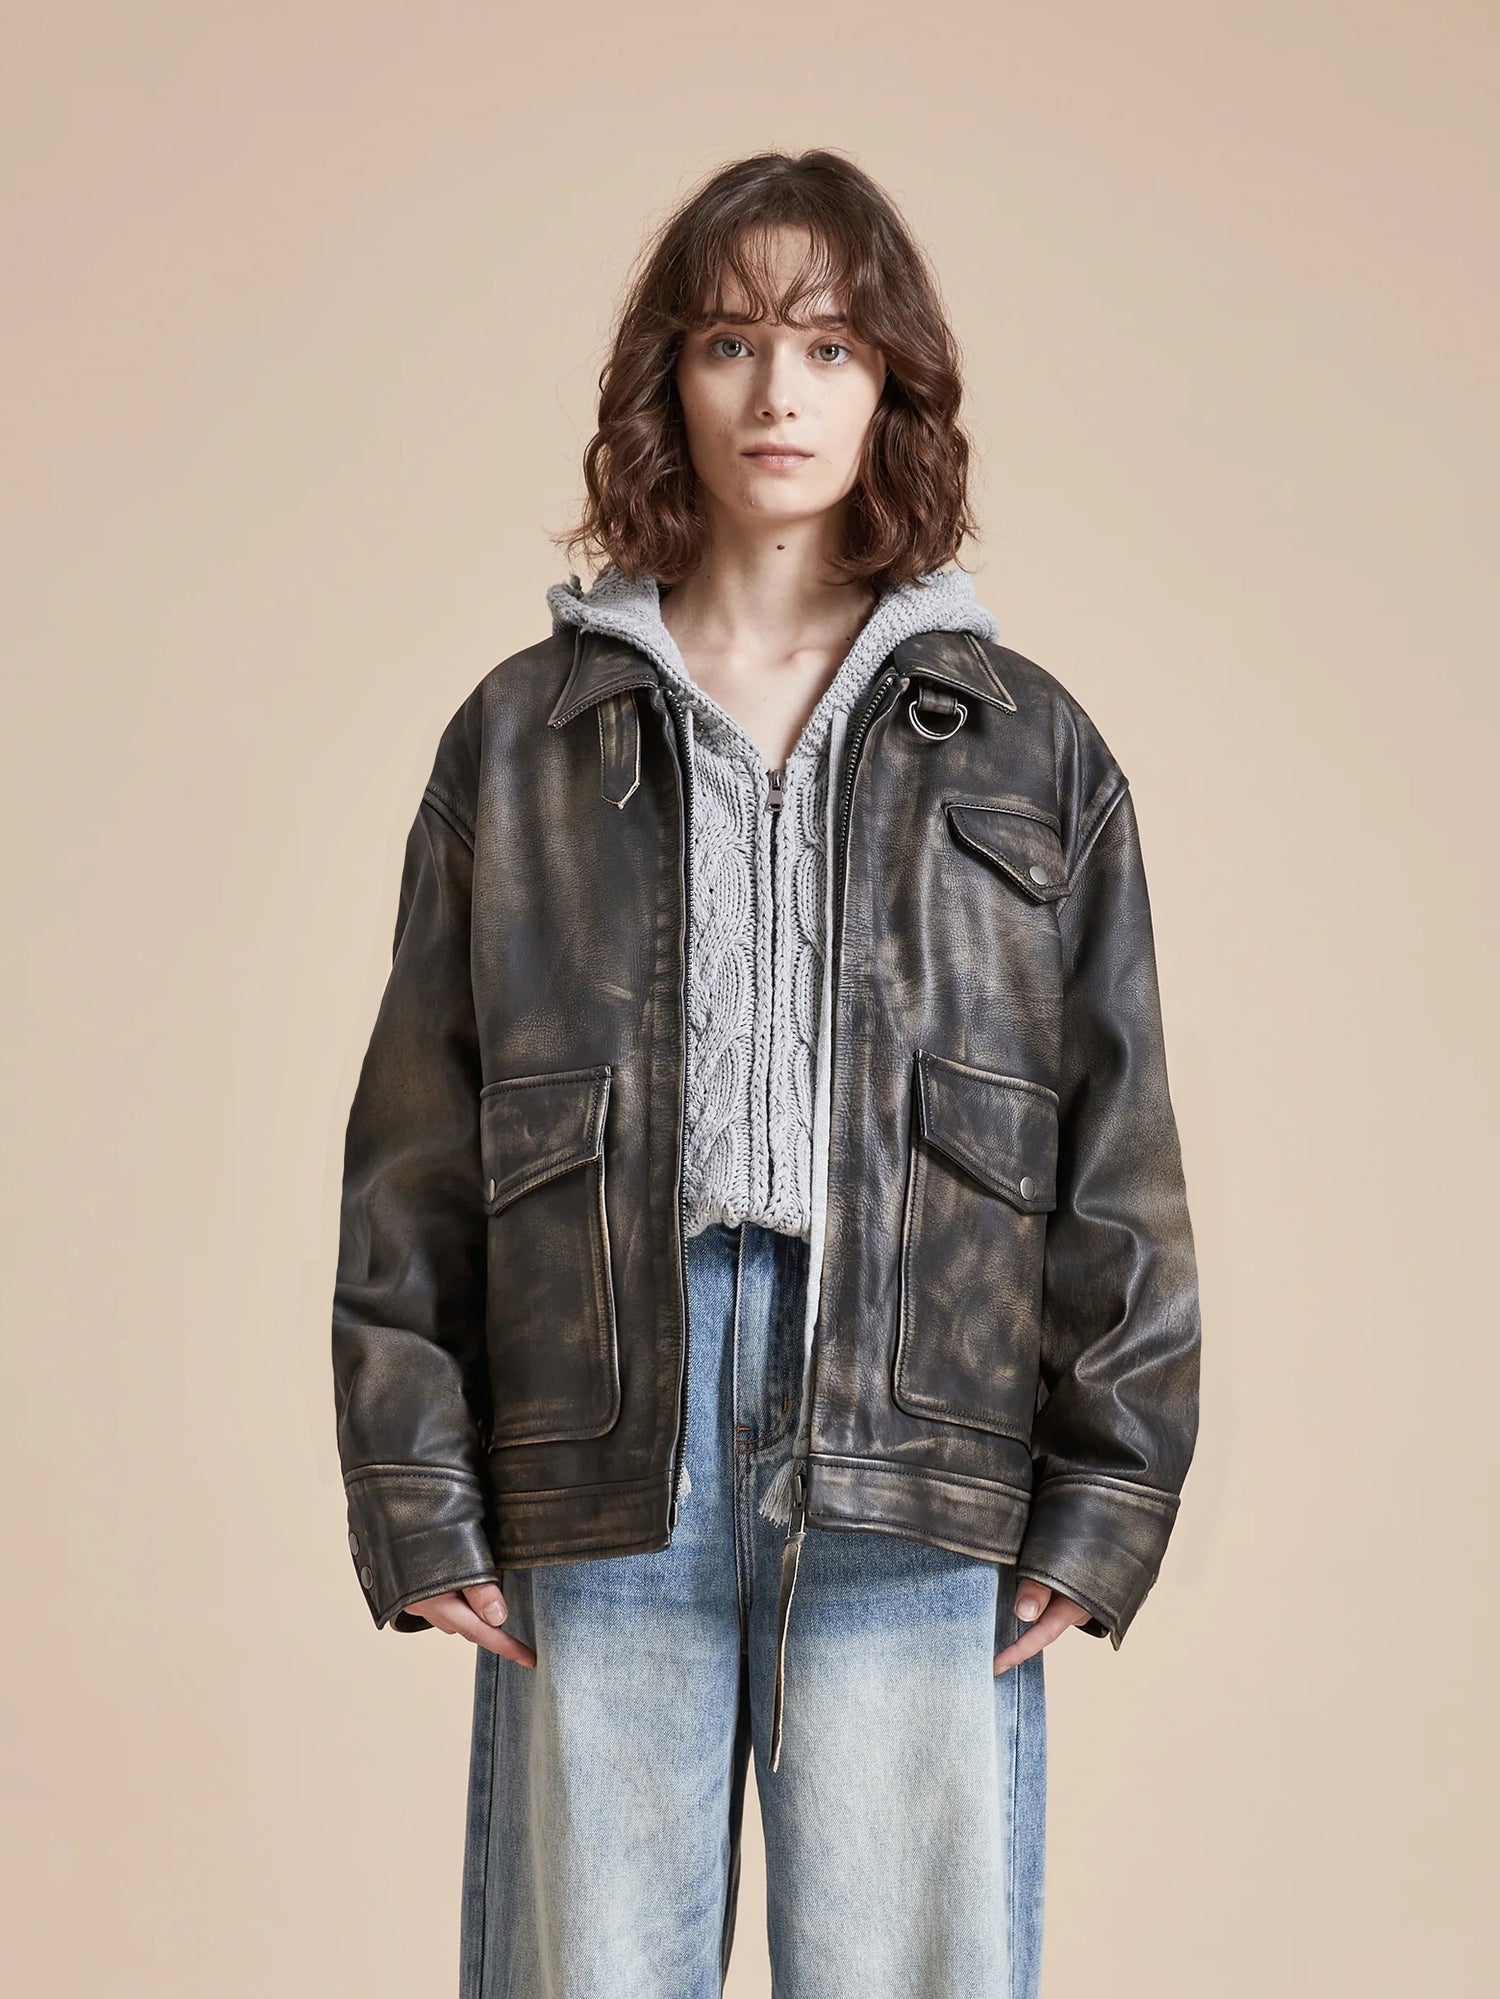 The model is wearing a Found distressed leather pocket jacket with jeans.